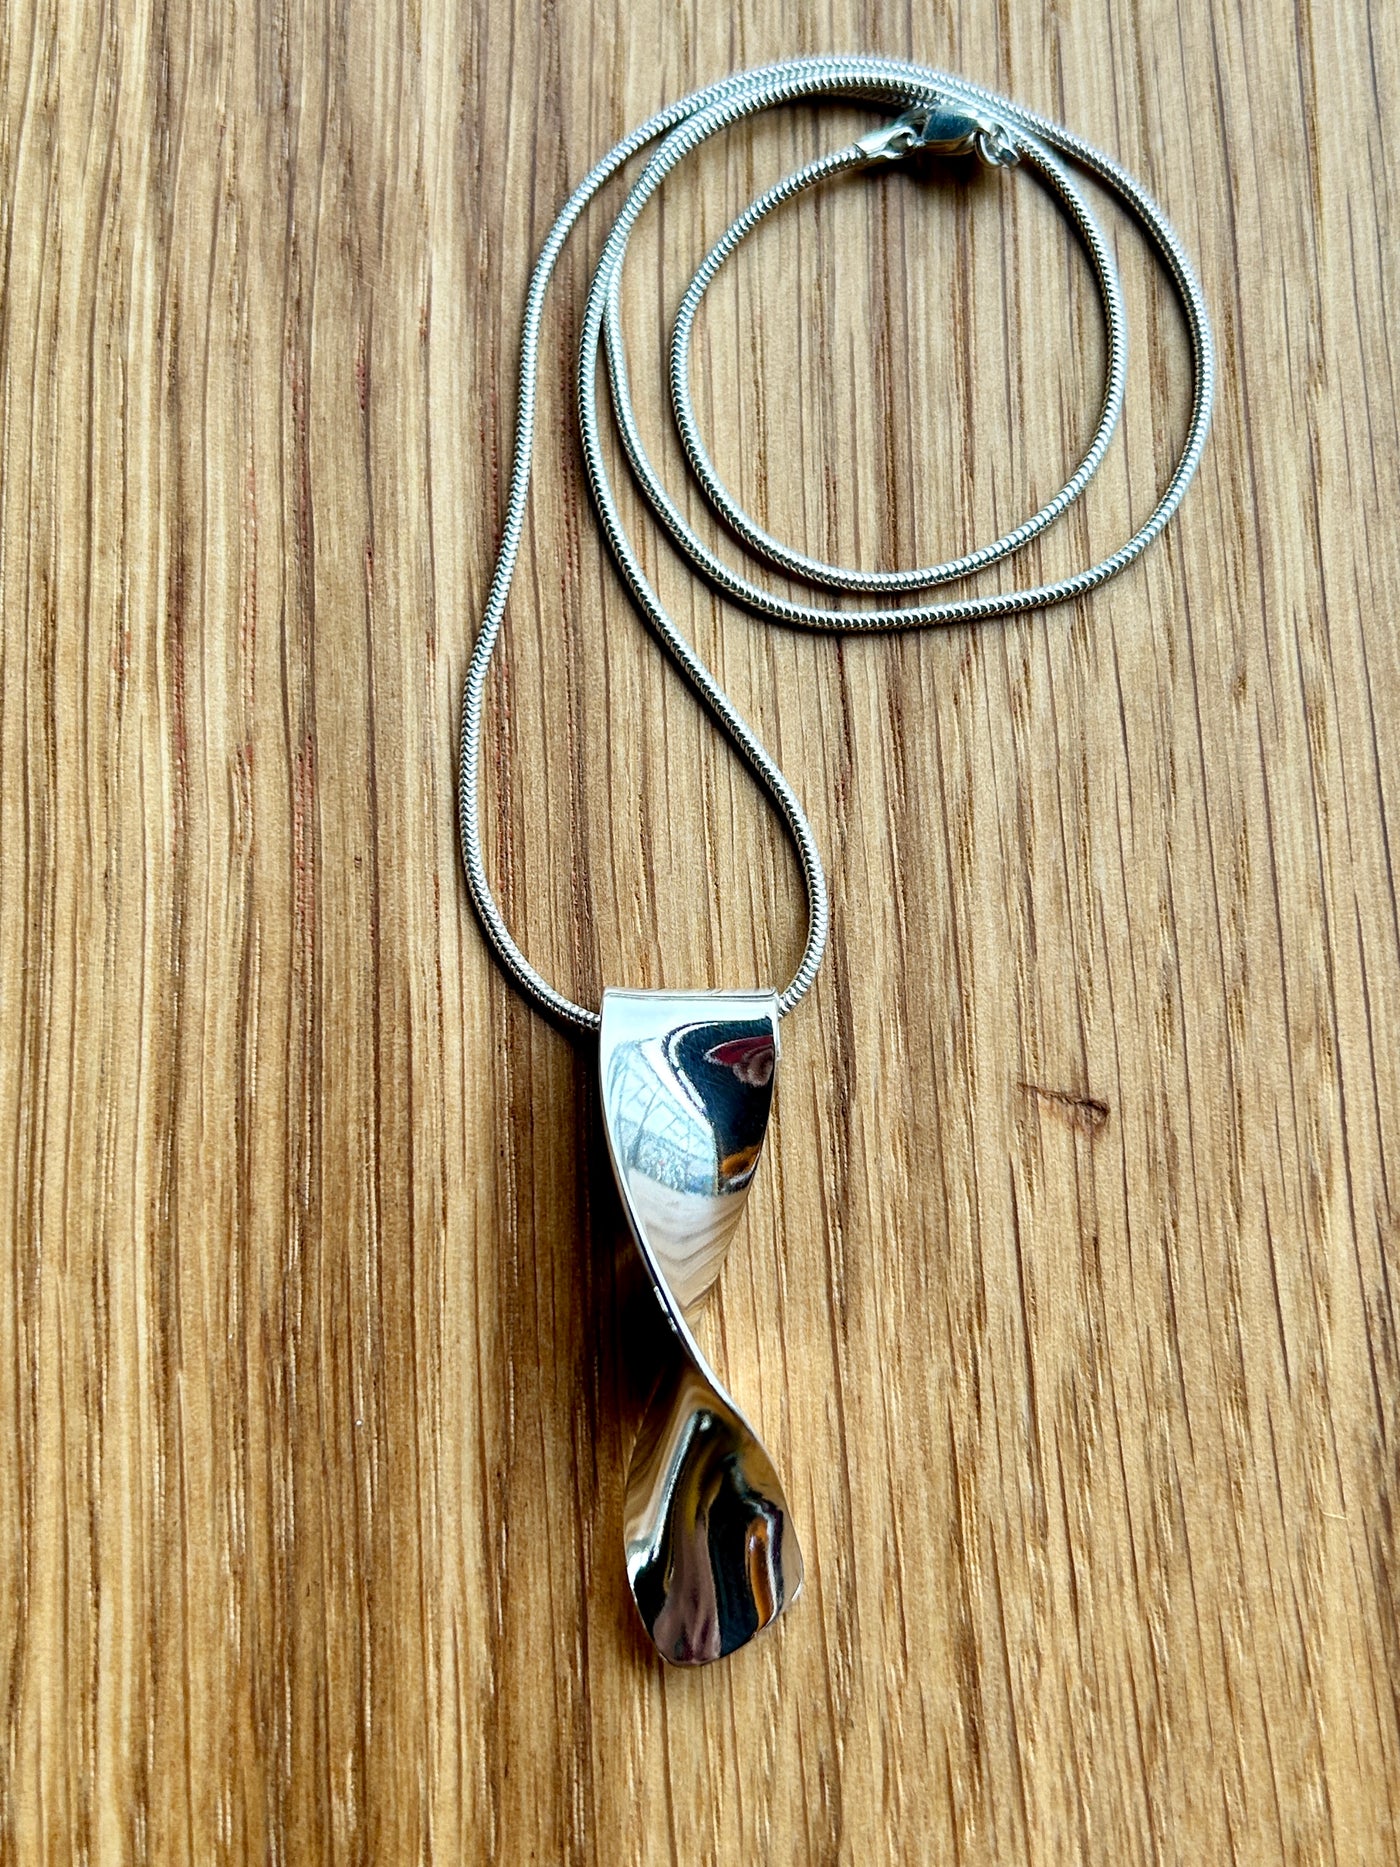 Twisted Silver Pendant